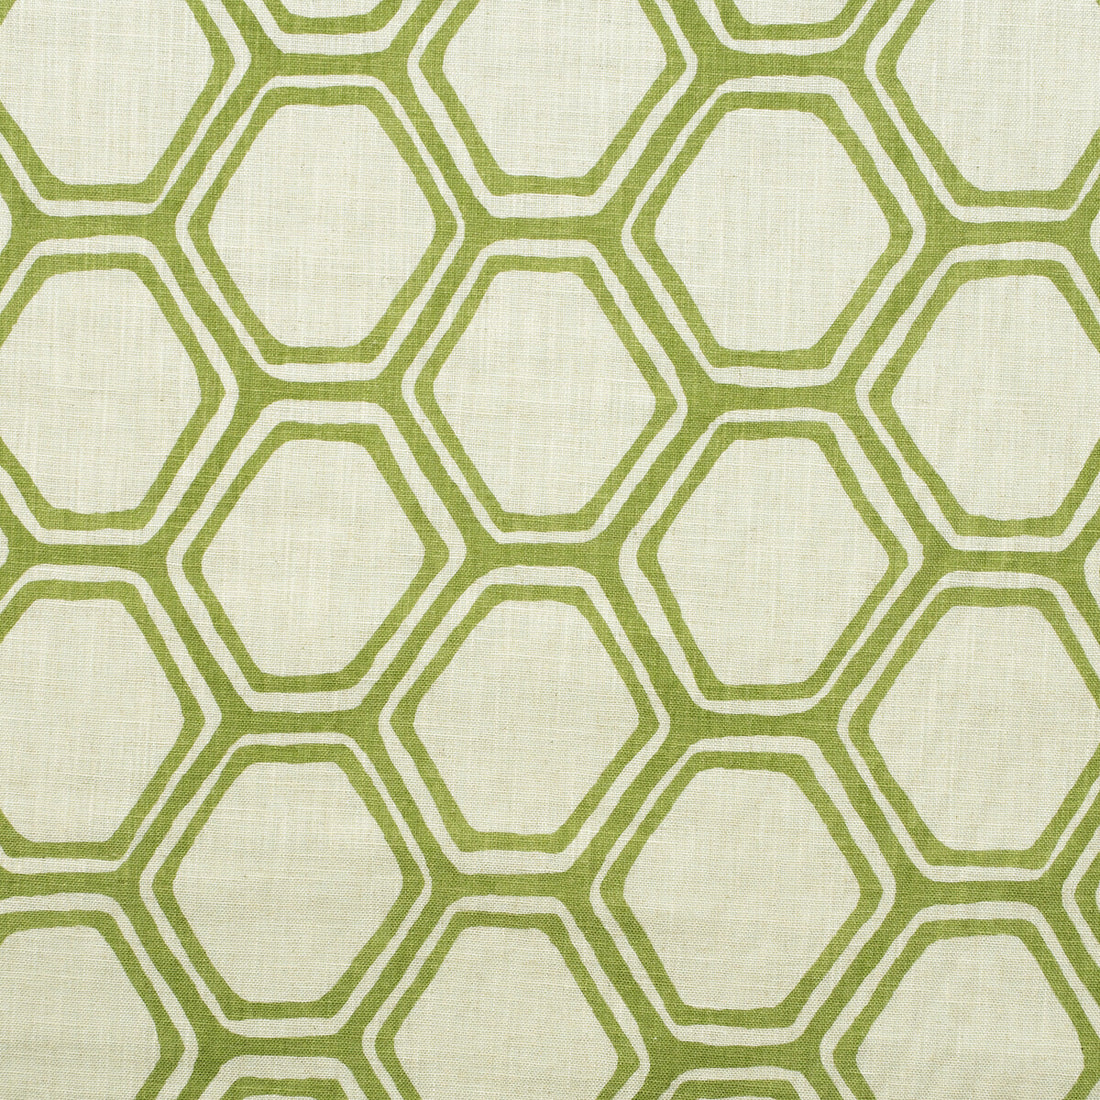 Pergola fabric in leaf color - pattern AM100408.31.0 - by Kravet Couture in the Andrew Martin The Secret Garden collection